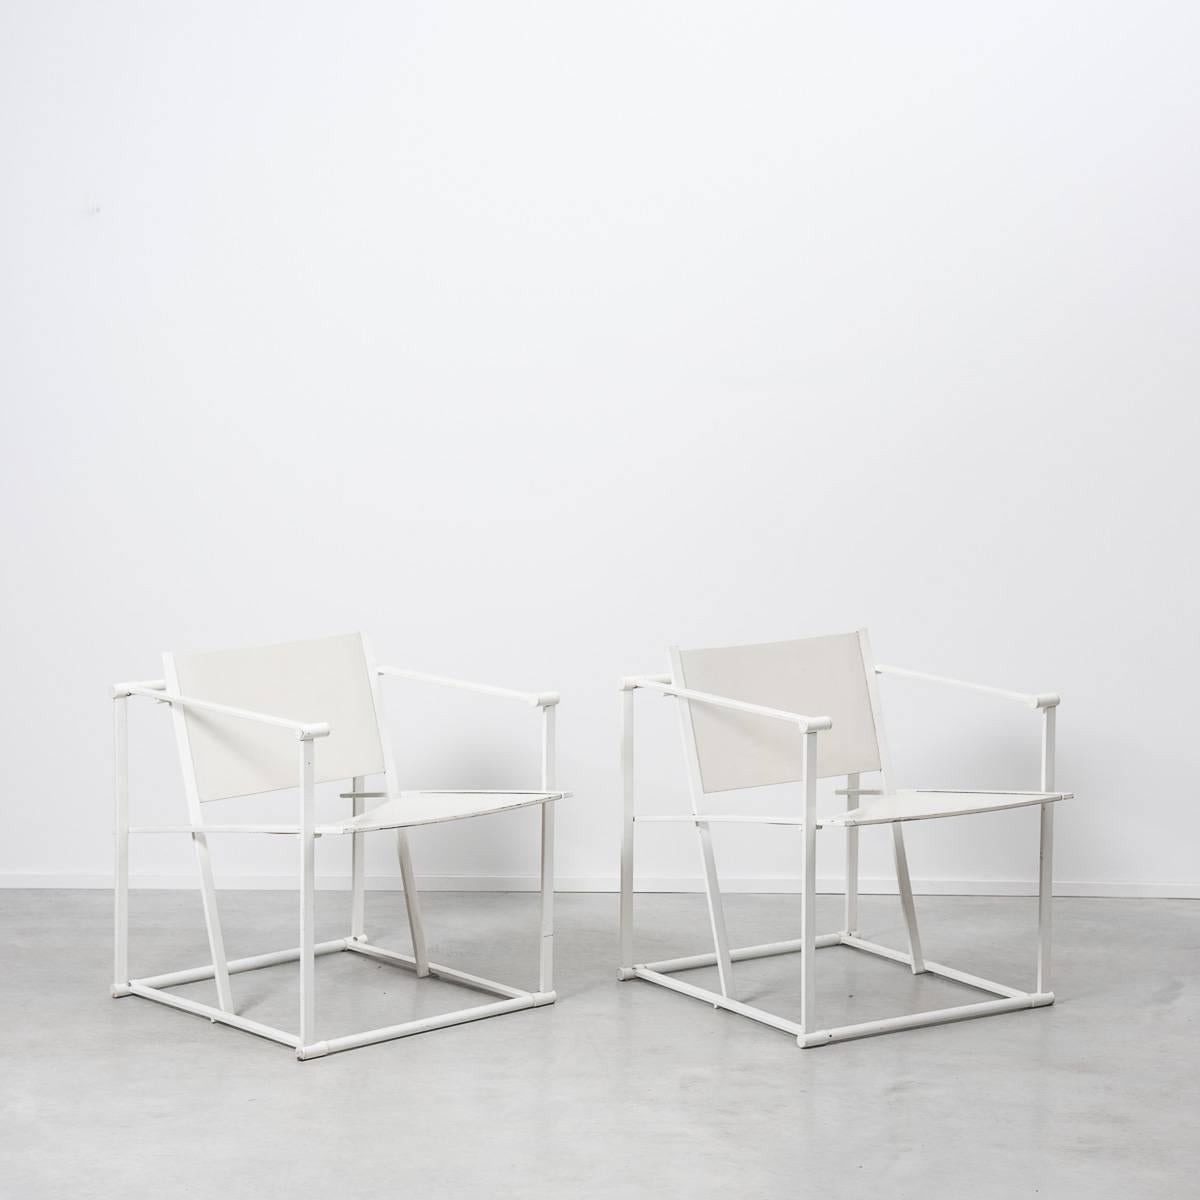 Radboud Van Beekum white FM61 cube chairs for Pastoe, Netherlands, 1982.
A geometric chair constructed from white folded steel with white ply seating. Following in the tradition of the De Stijl movement, the FM60 series (FM60-FM62) was inspired by